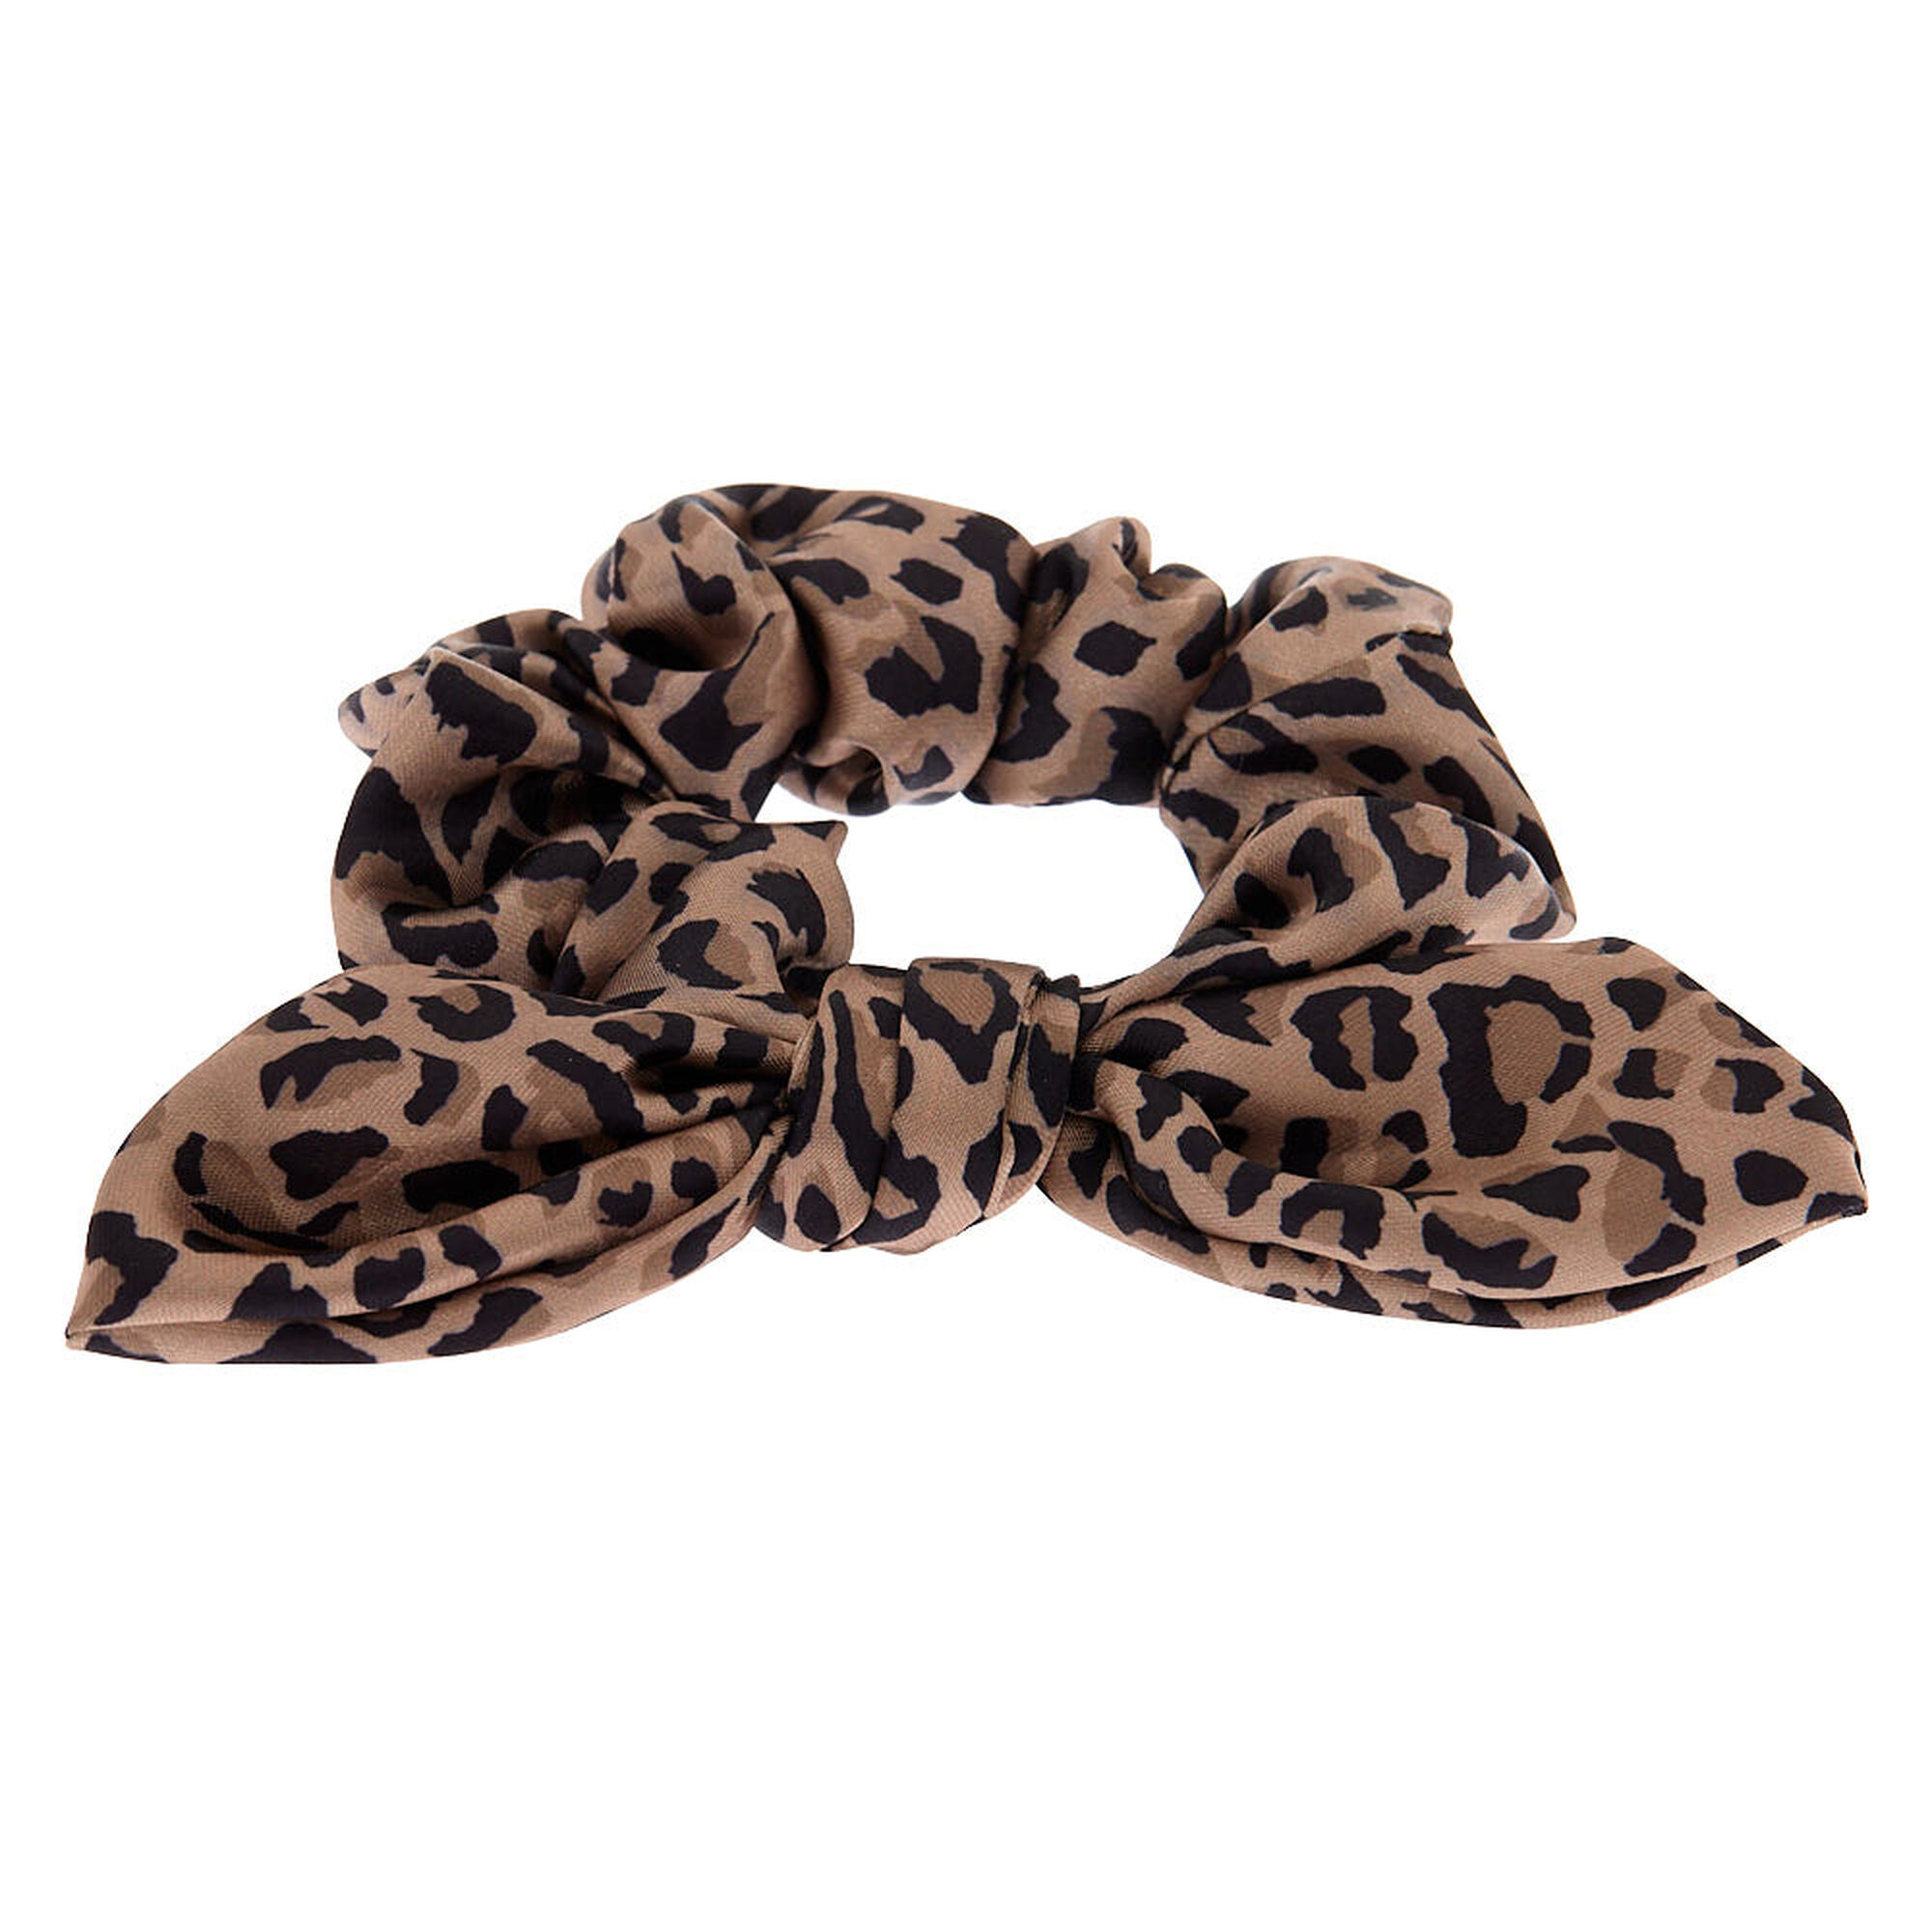 J Crew Satin scrunchie with bow In Leopard Print NWT $20 